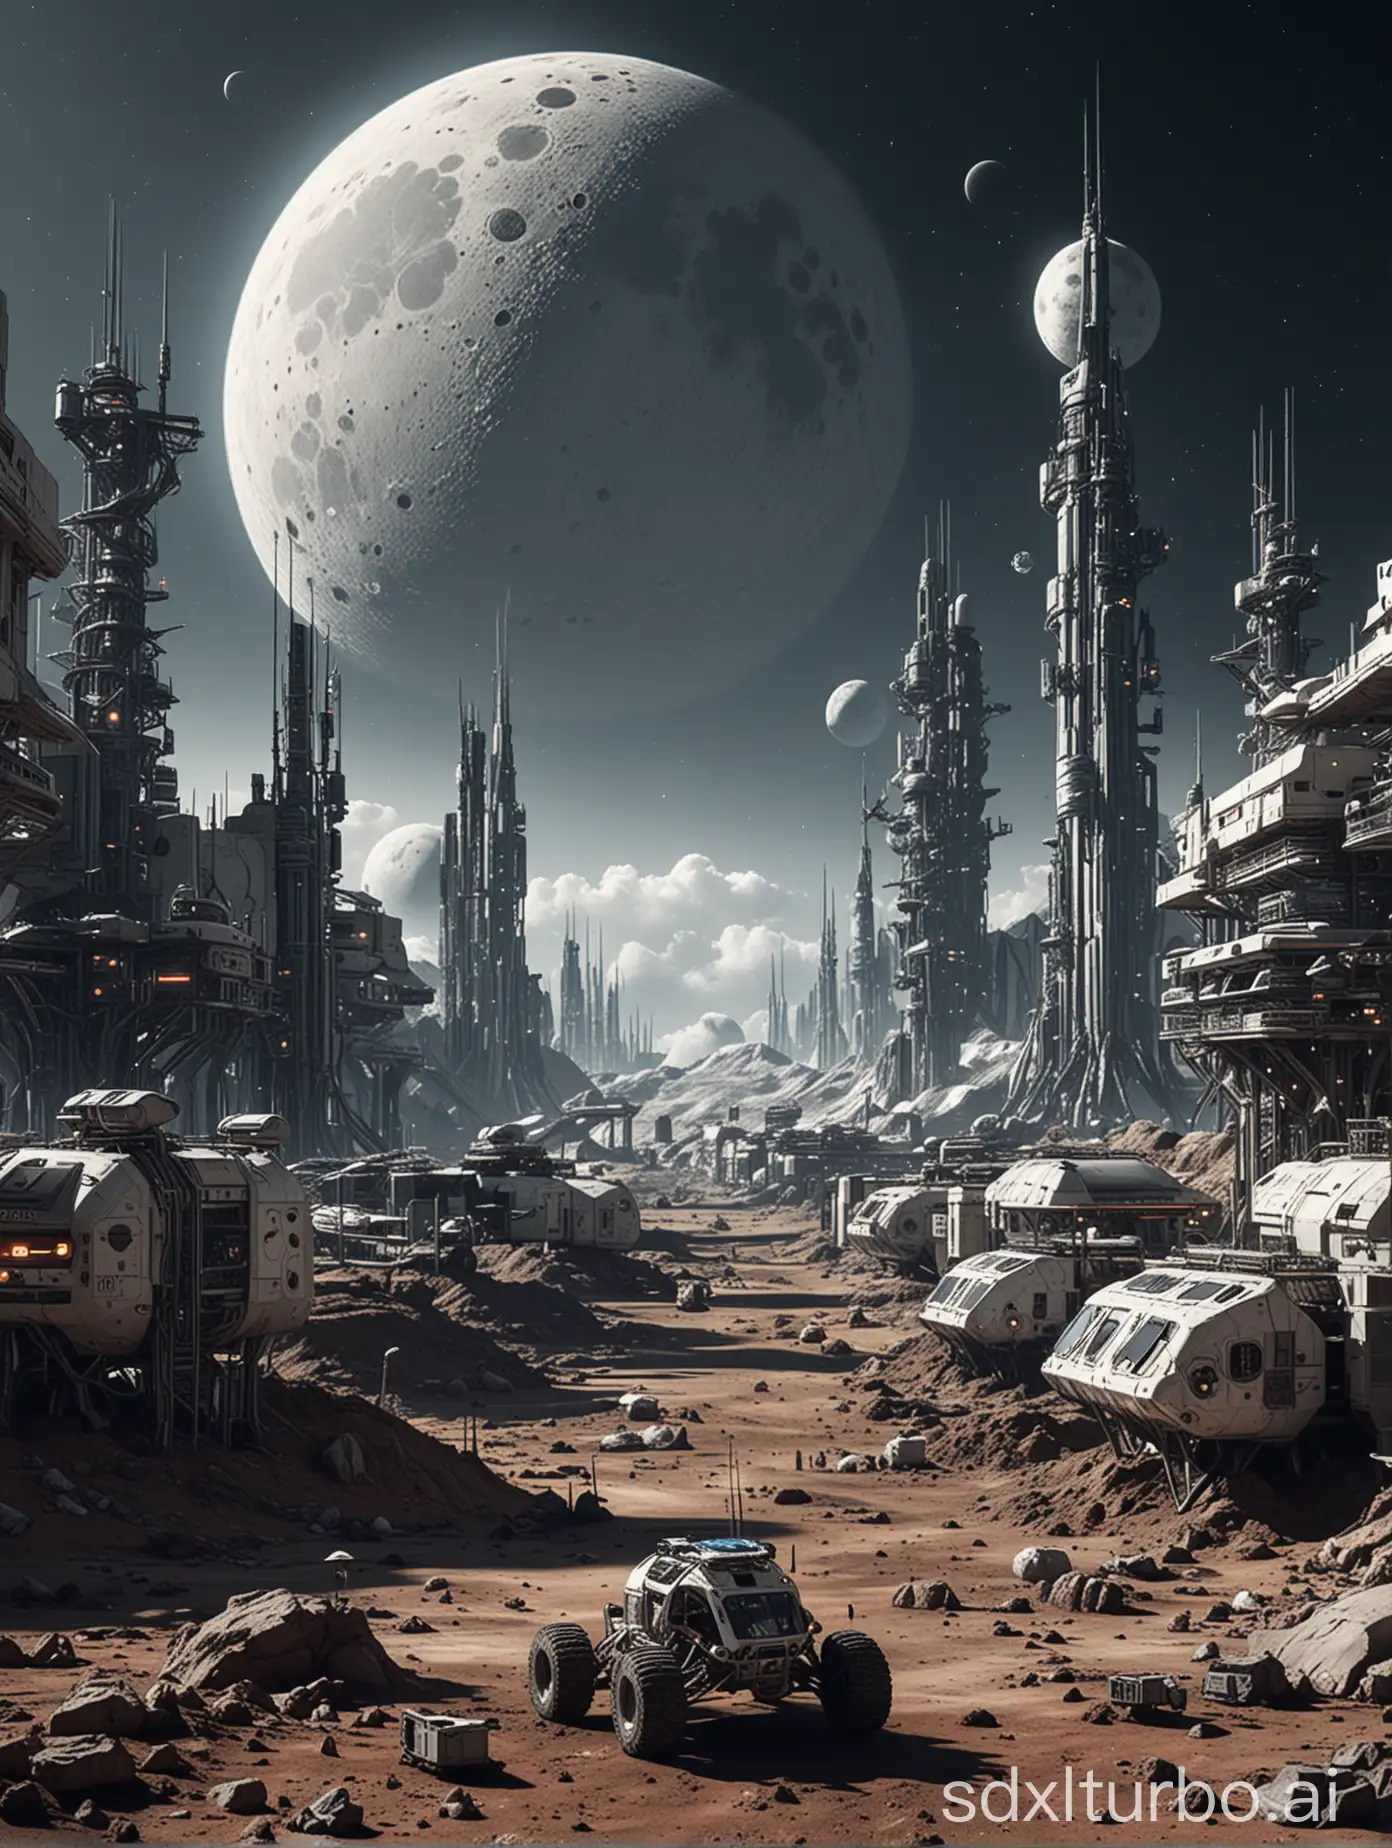 Futuristic-Moon-Habitat-Extraterrestrial-City-and-Space-Station-with-Moon-Buggy